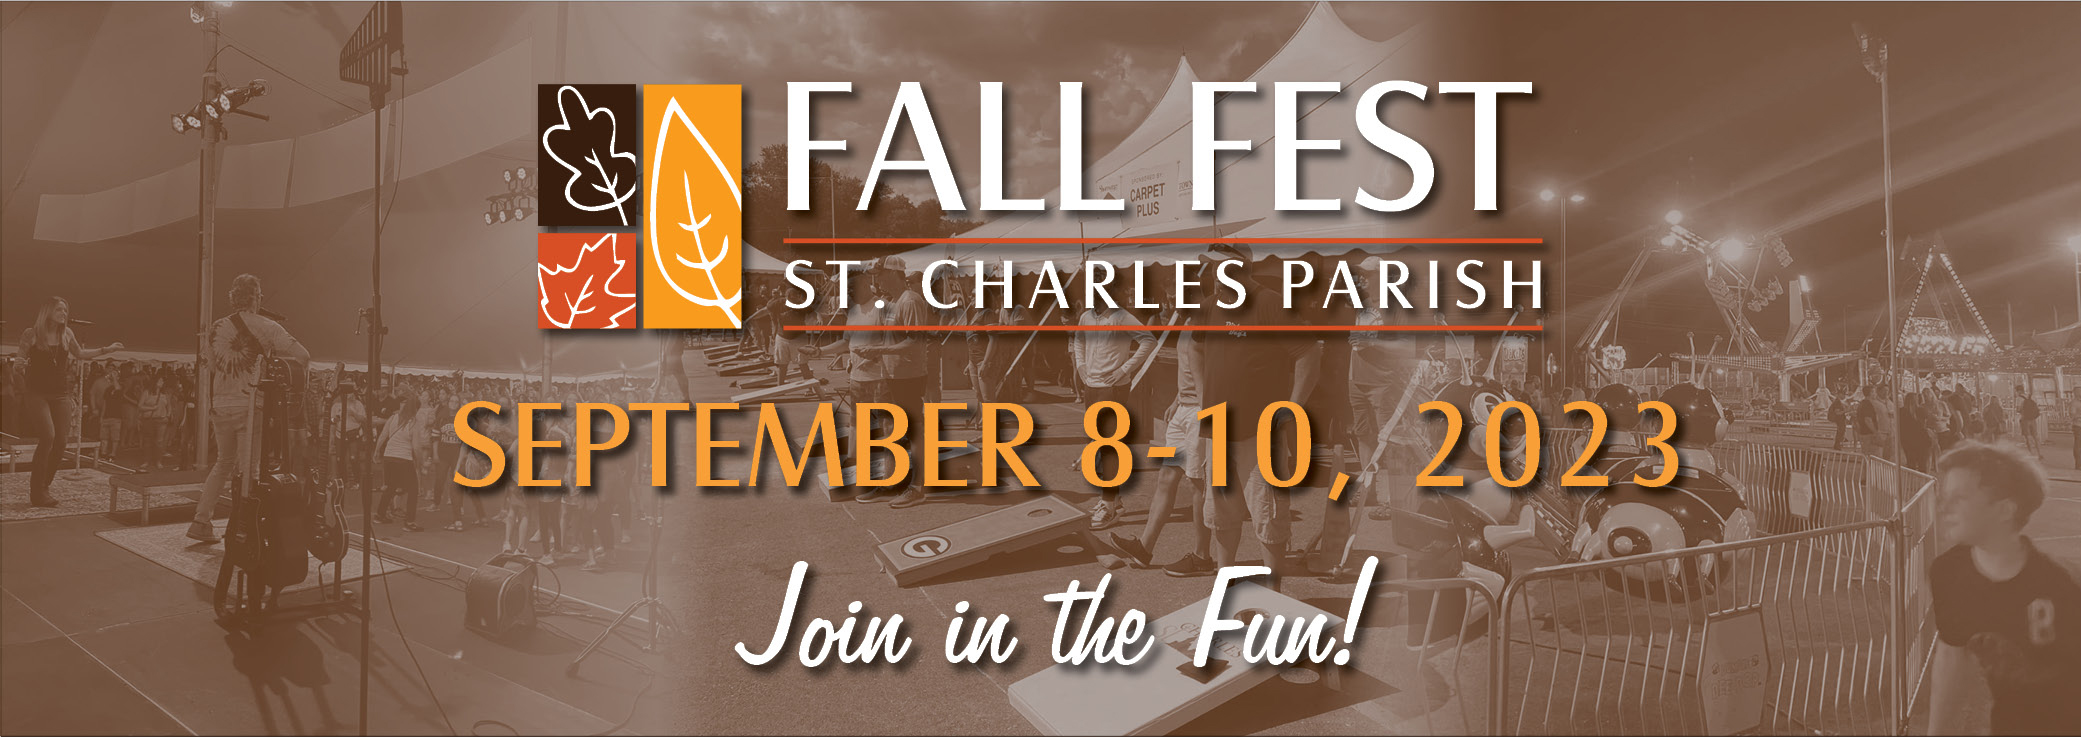 '2023 St Charles Fall Fest welcome